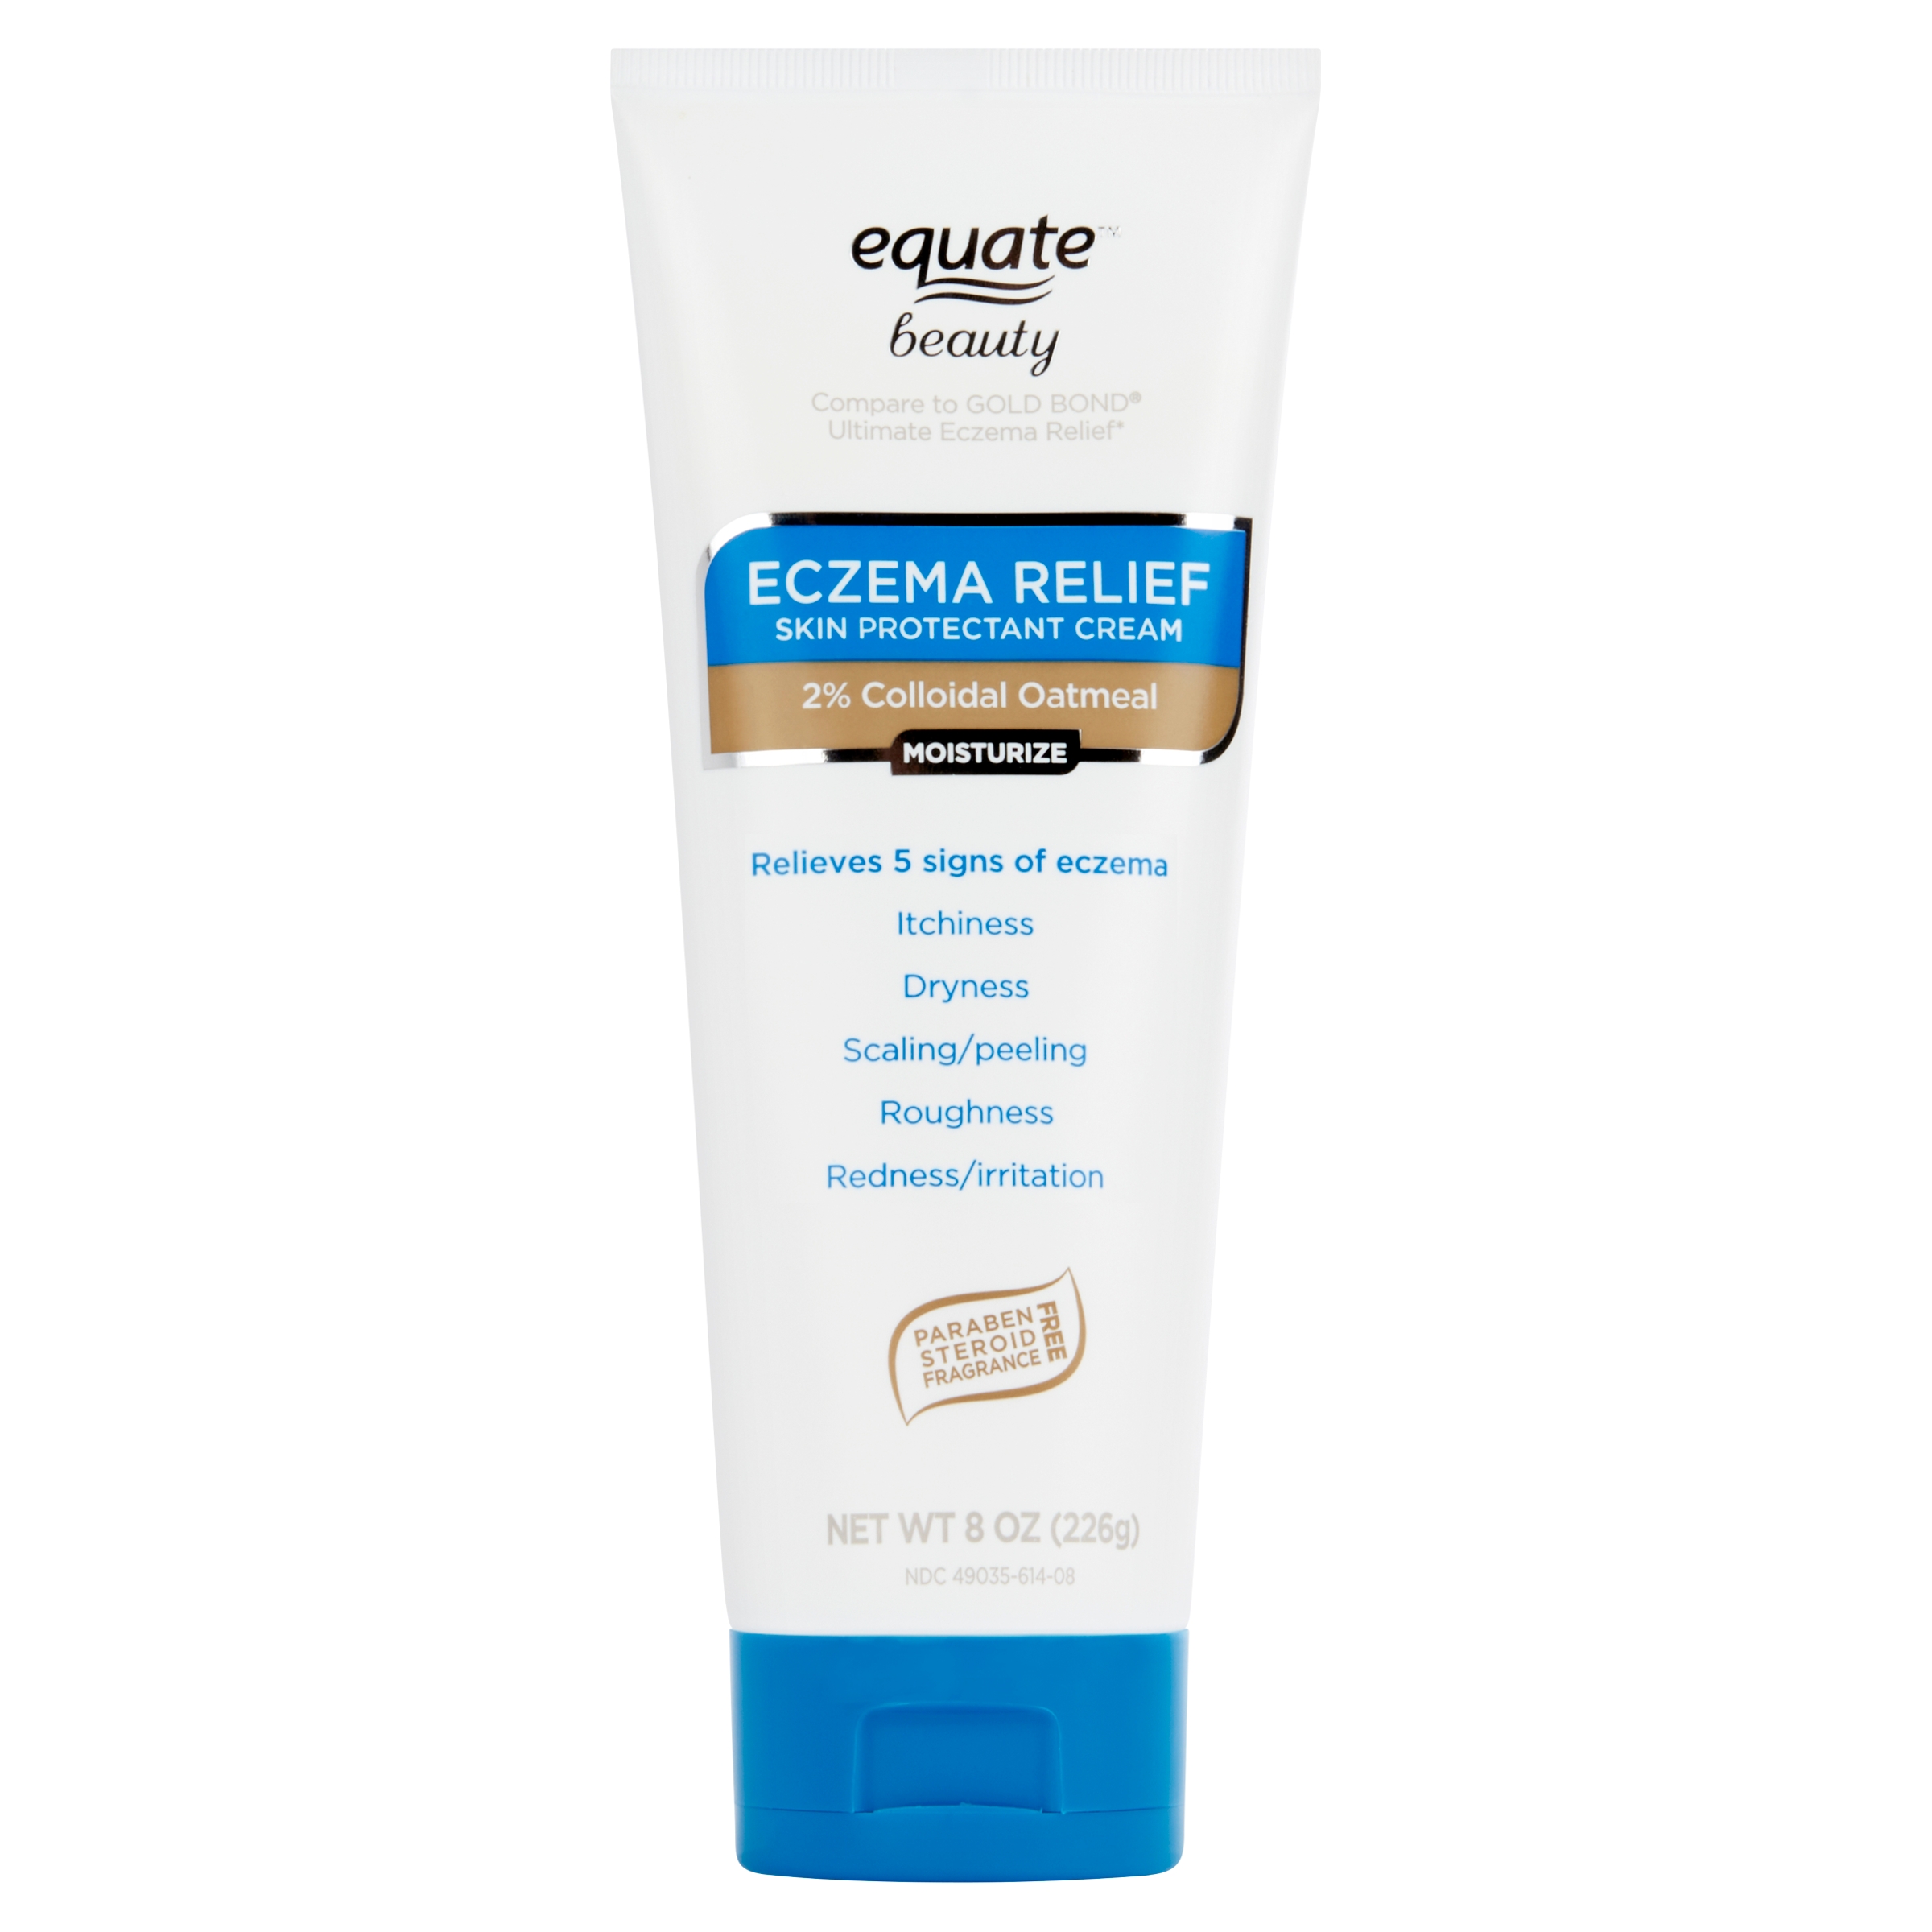 Equate Beauty Eczema Relief Skin Protectant Cream, 8 Oz. - image 1 of 9